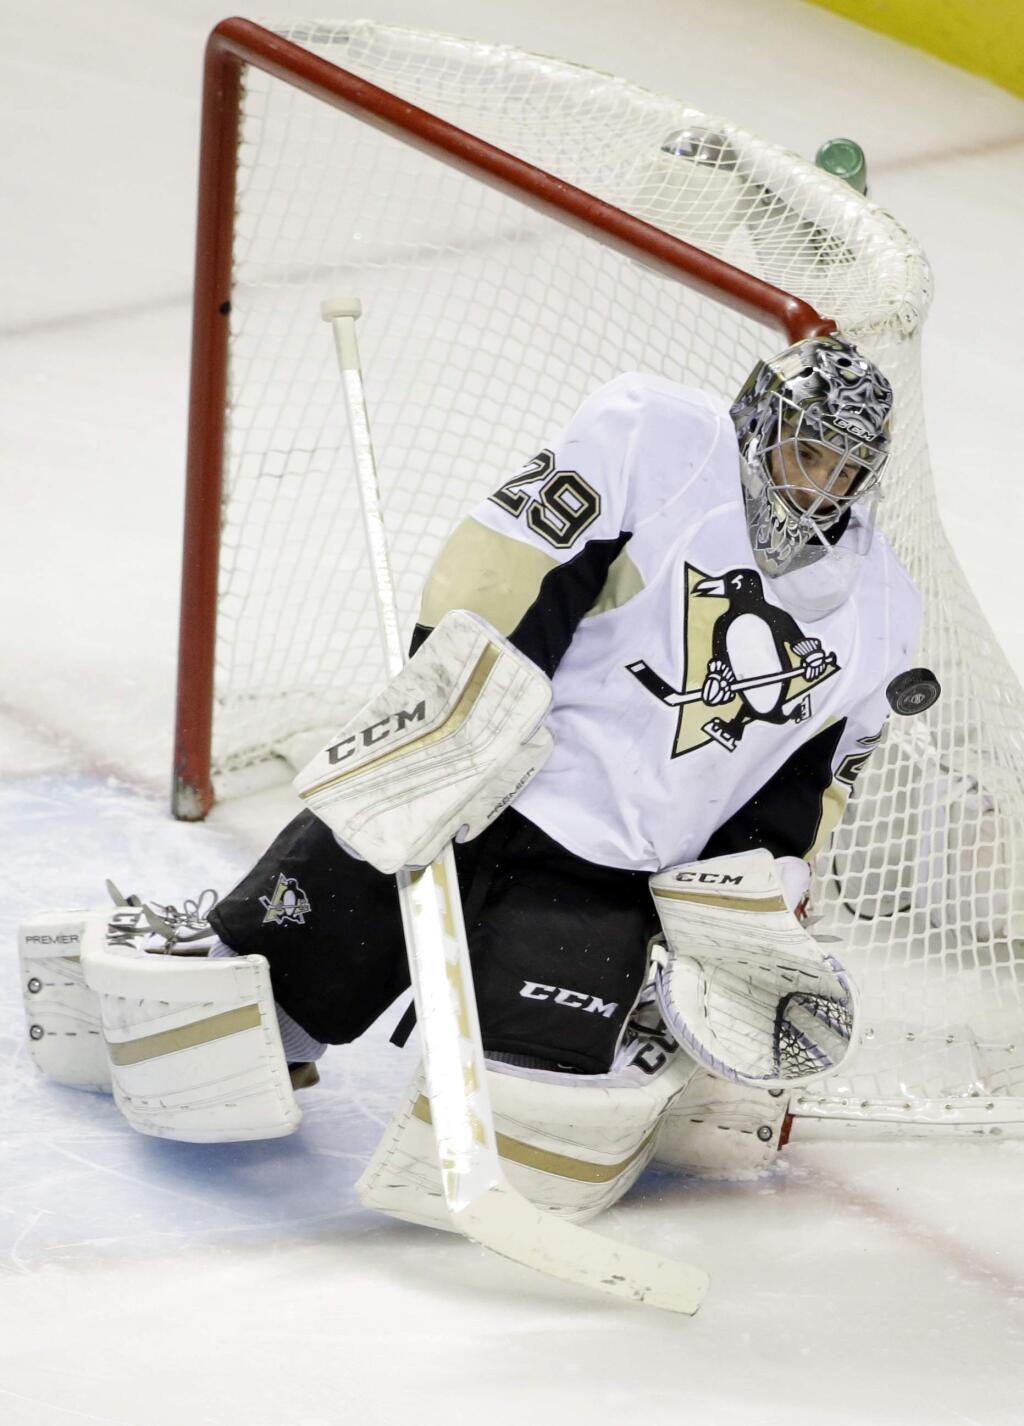 Pittsburgh Penguins goalie Marc-Andre Fleury (29) stops a shot on goal against the San Jose Sharks during the first period of an NHL hockey game Tuesday, Dec. 1, 2015, in San Jose, Calif. (AP Photo/Marcio Jose Sanchez)